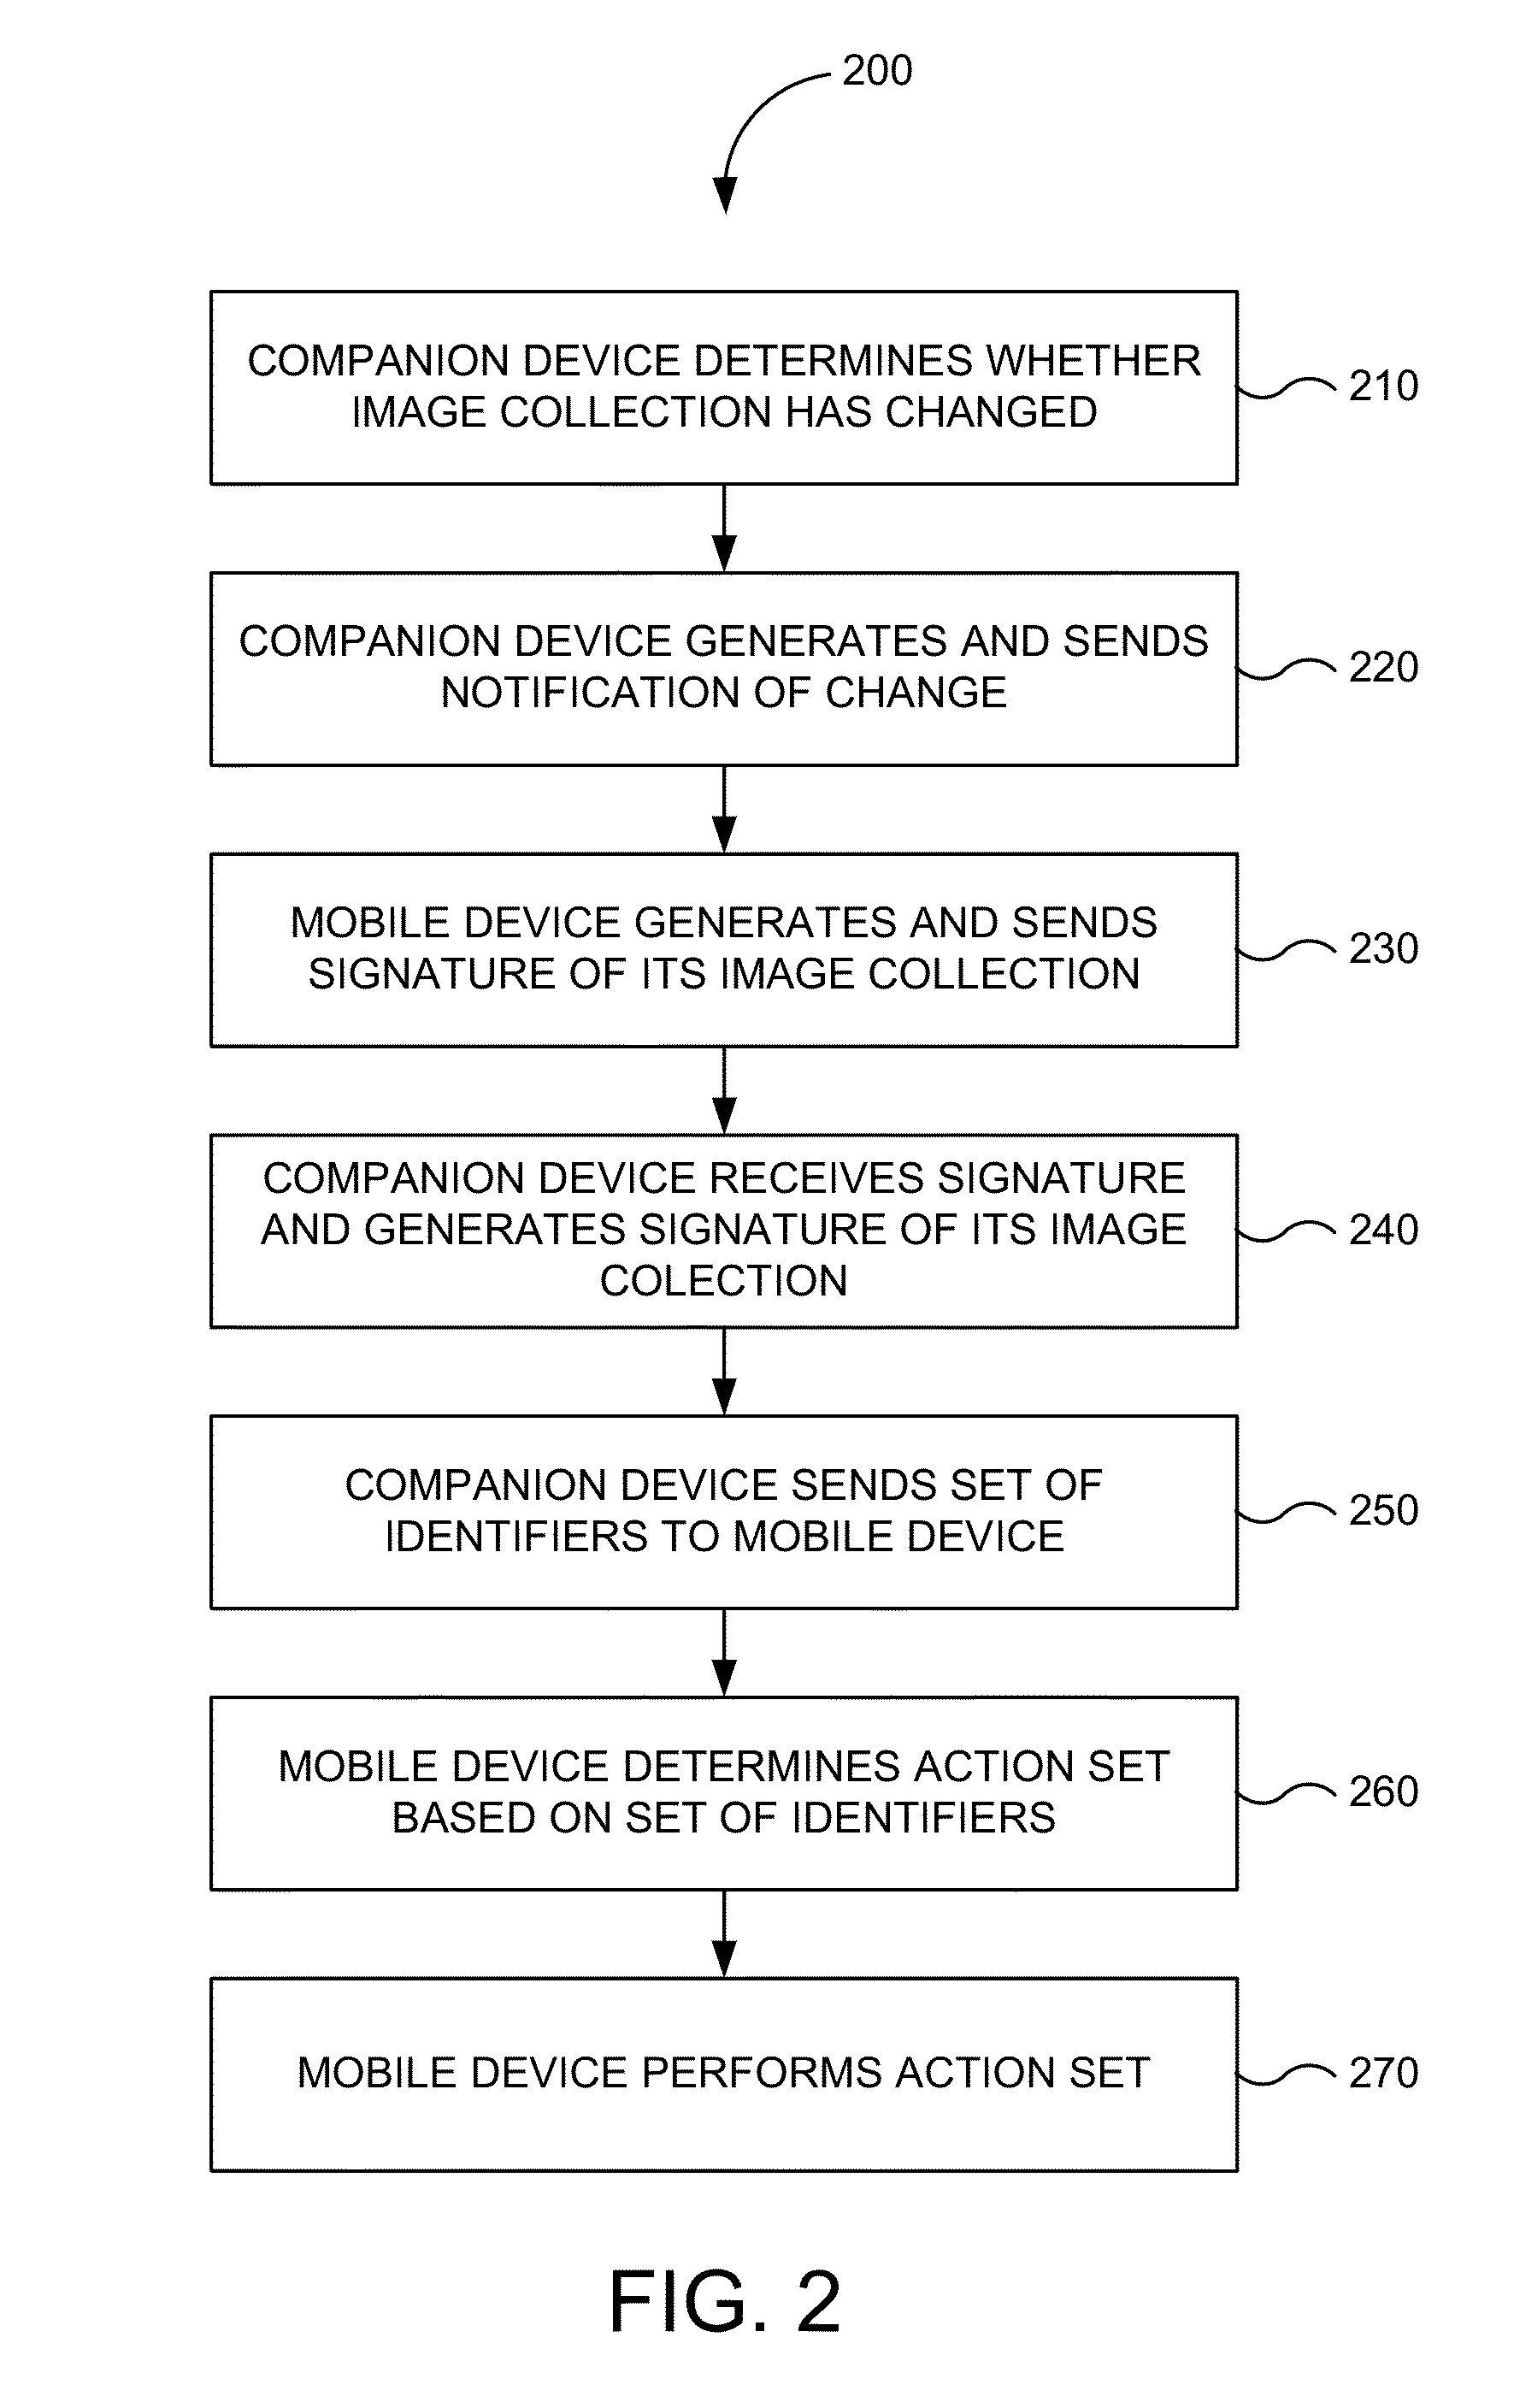 Image display and interaction using a mobile device